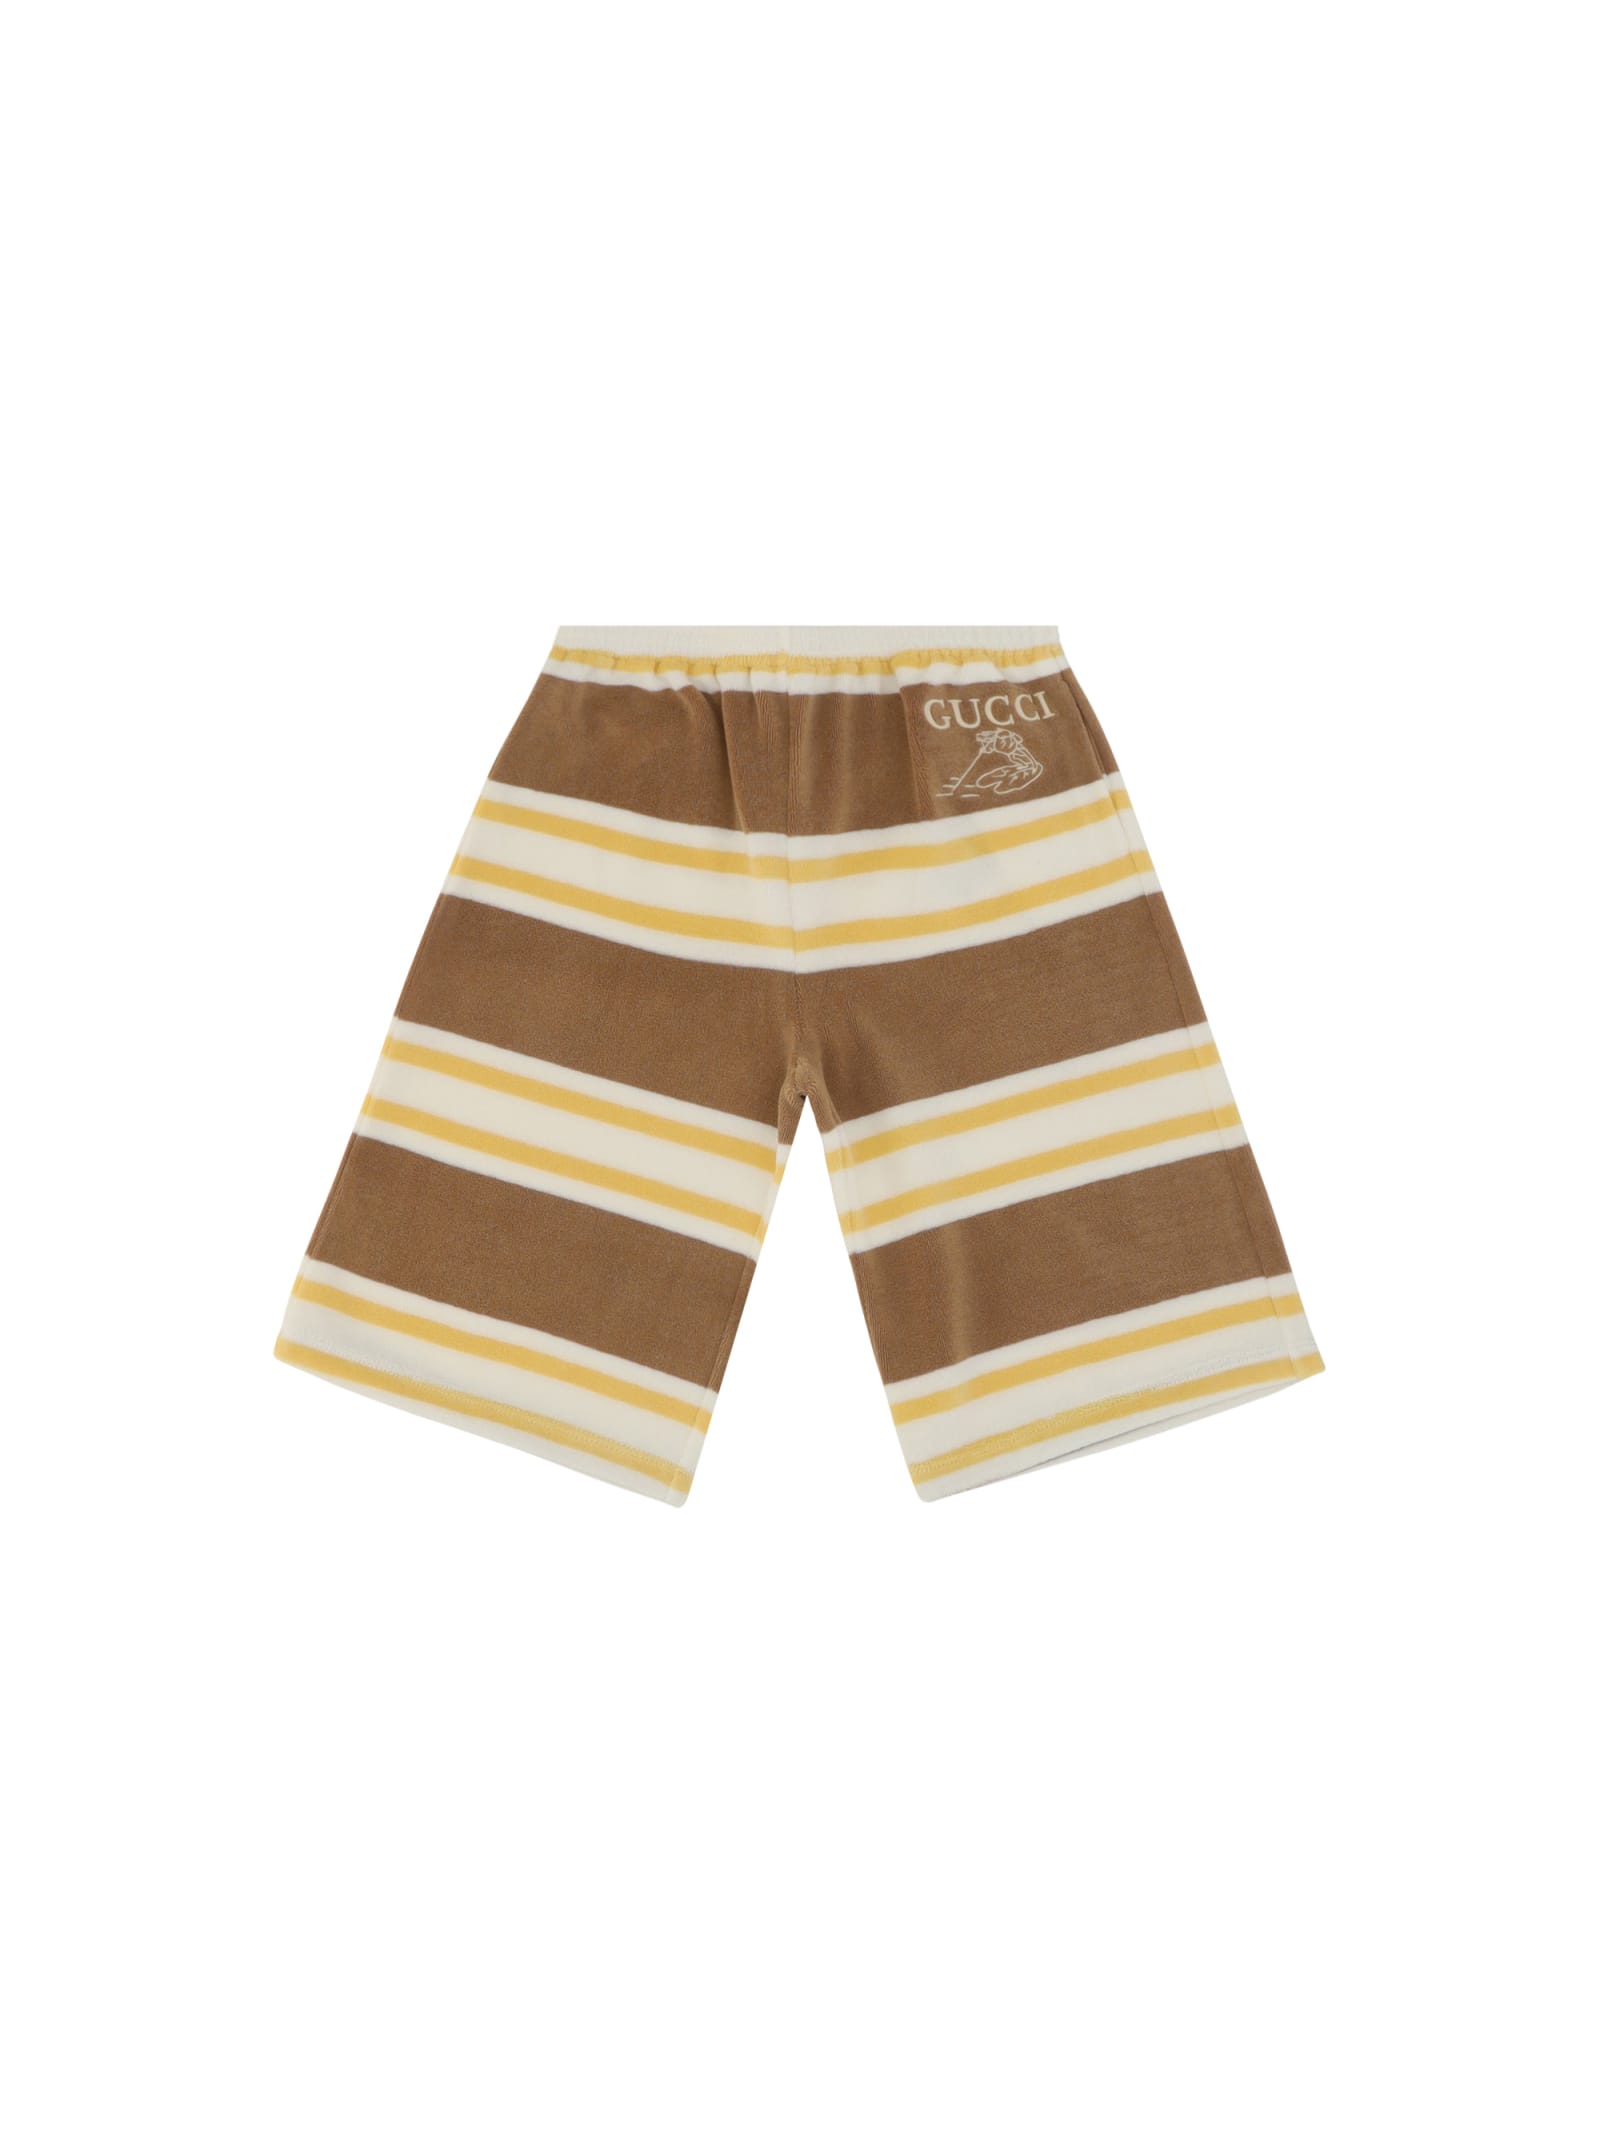 Shop Gucci Shorts For Boy In Yellow/brown